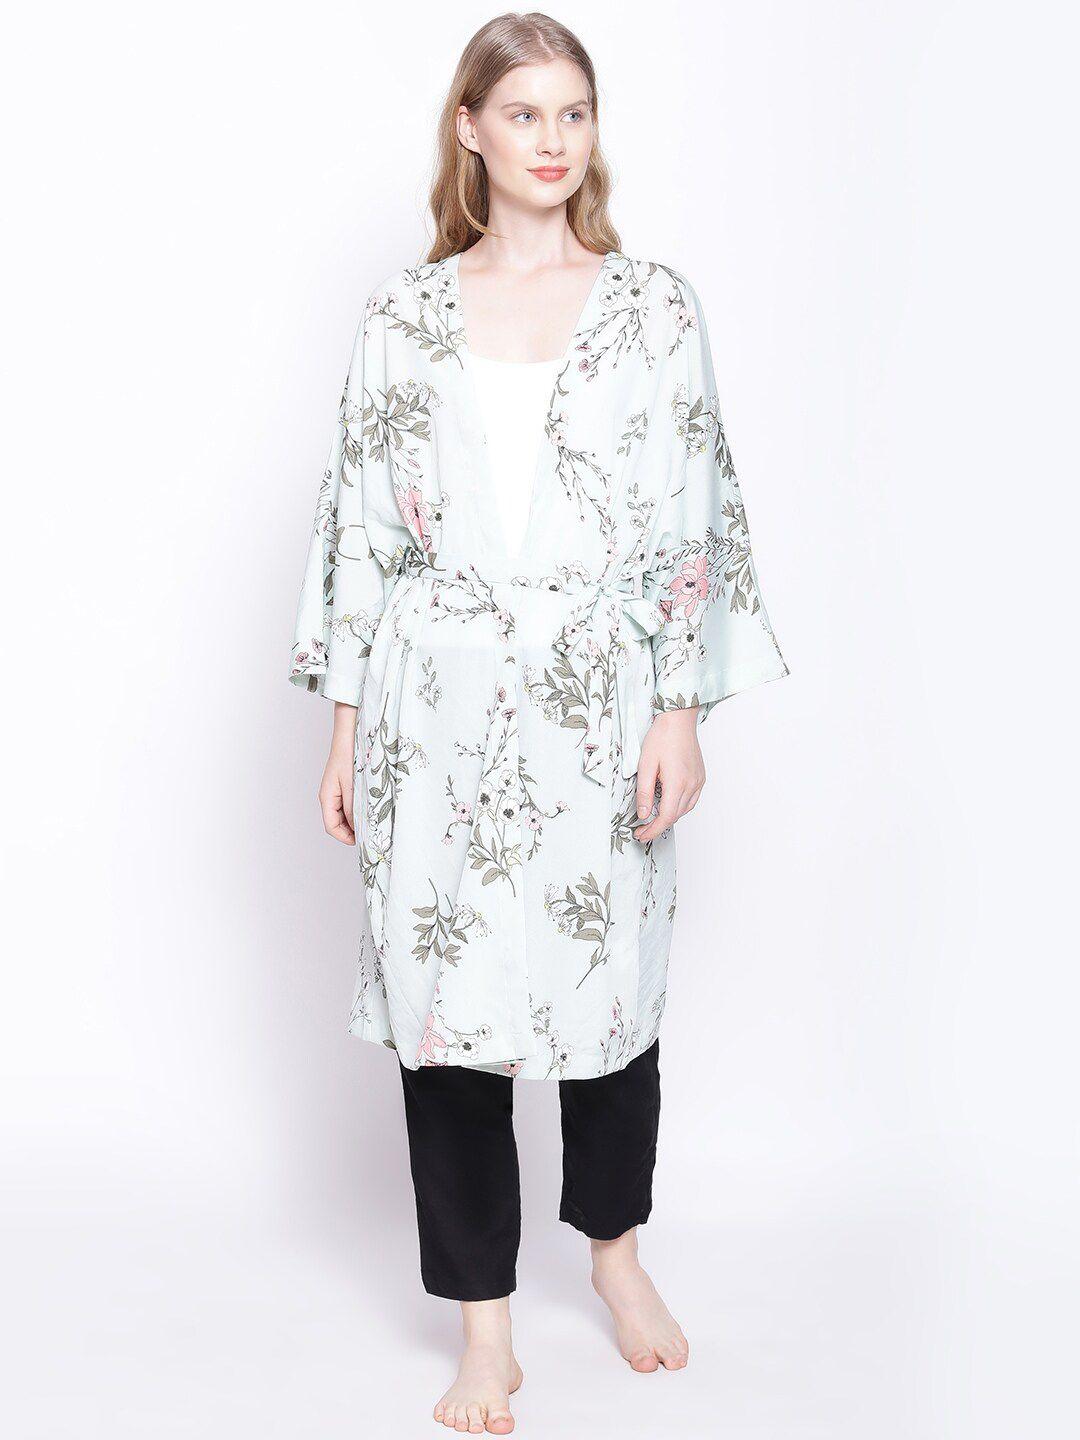 oxolloxo-green-printed-tie-knot-nightdress-cover-up